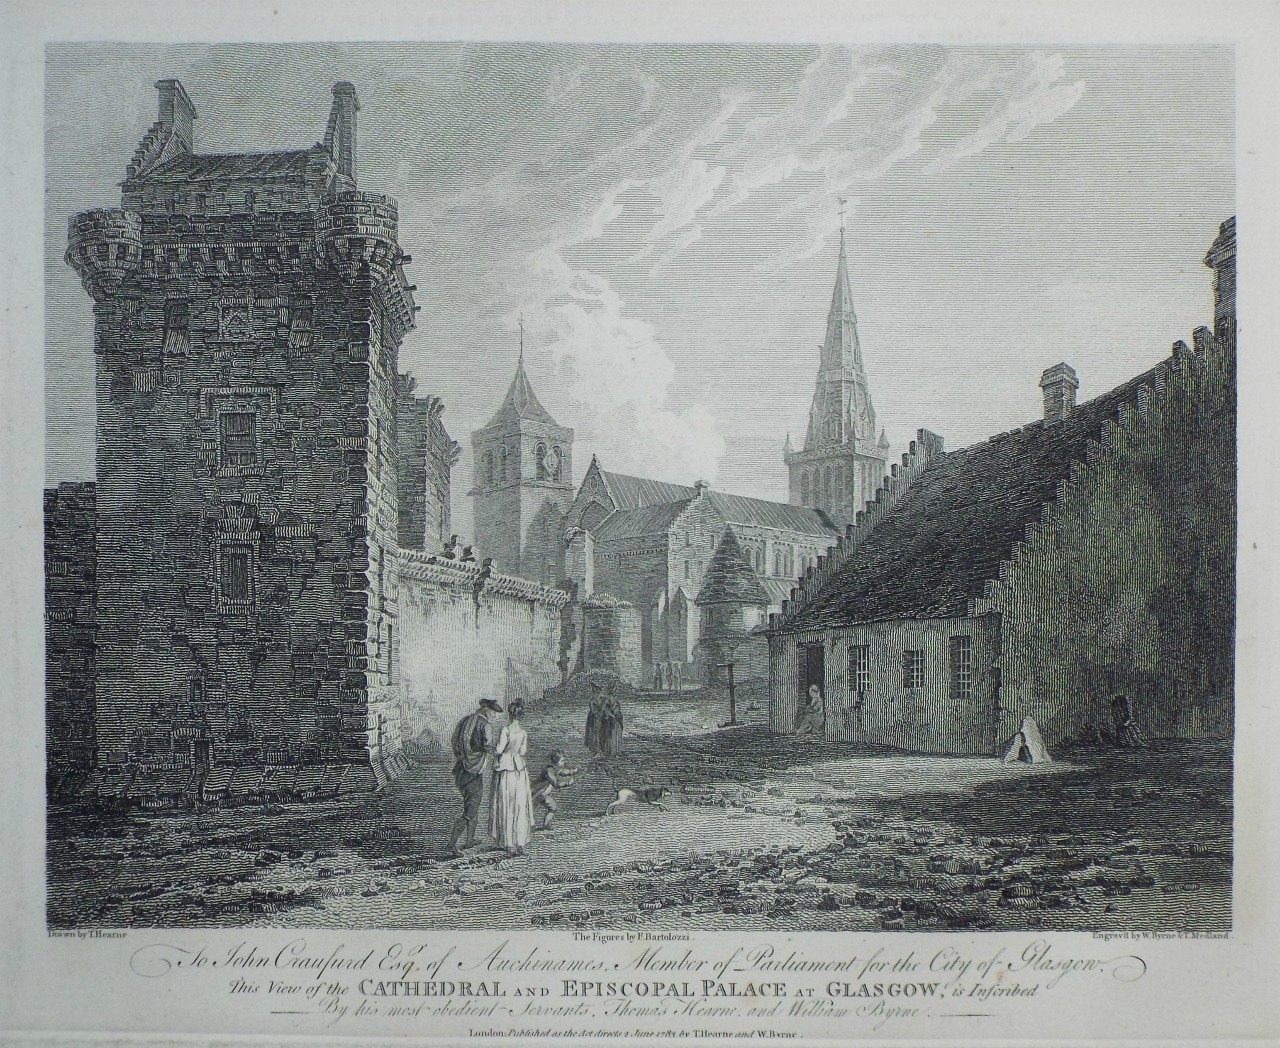 Print - Cathedral and Episcopal Palace at Glagow - Smith